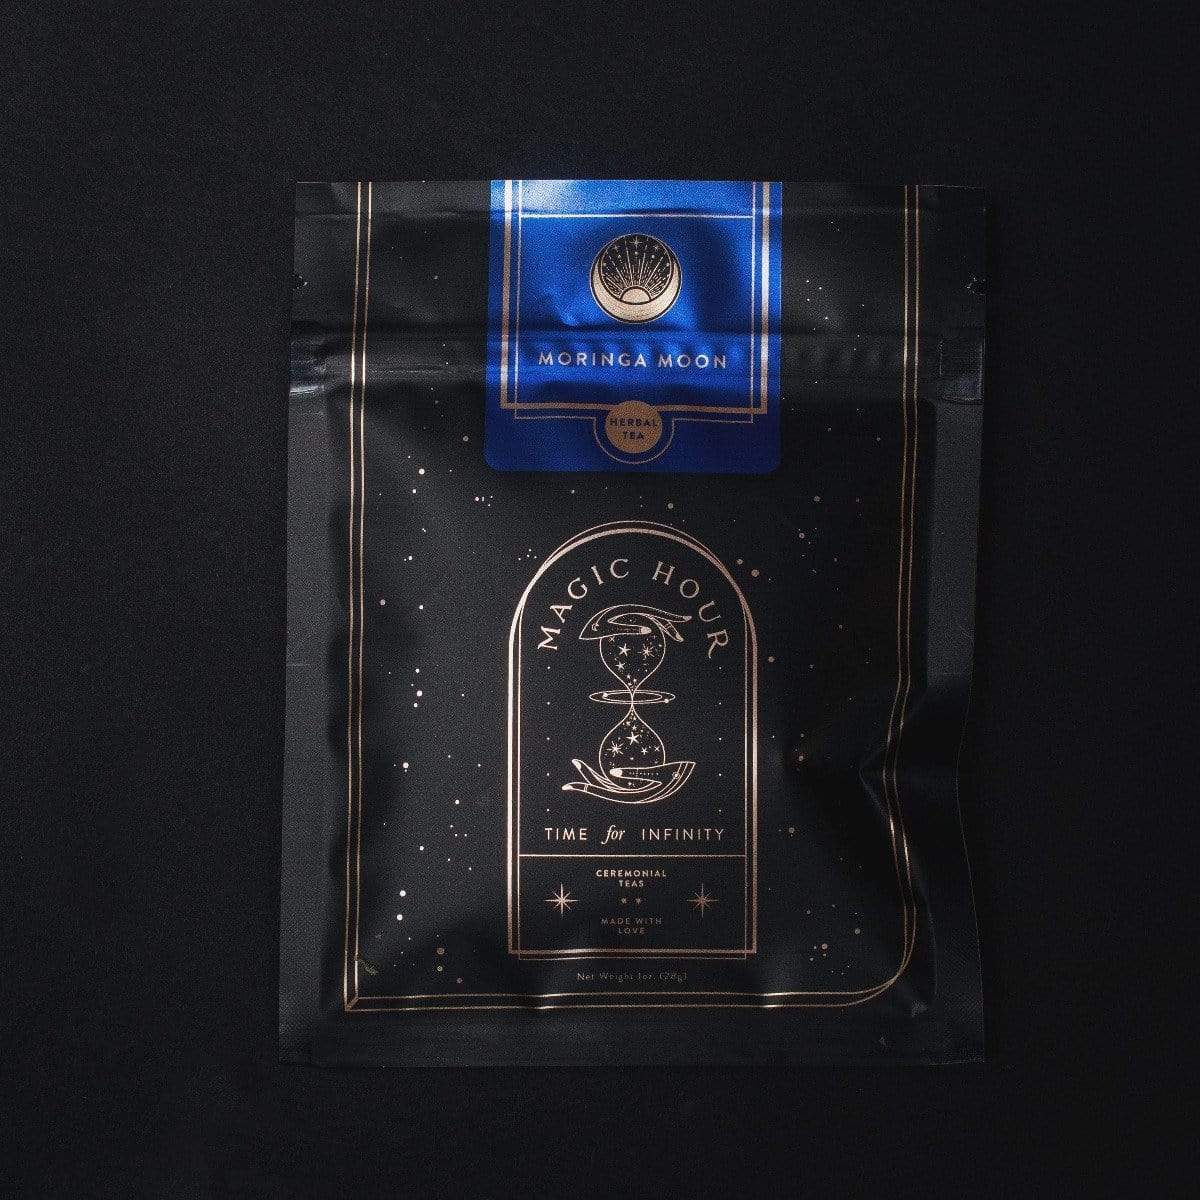 A black package of "Moon Lover: Herbal Immunitea Ritual Gift" organic tea with celestial designs and gold detailing from Magic Hour. The label features a blue section with a tree logo and text, while the main section showcases an hourglass graphic accompanied by "Time for Infinity" and the loose leaf tea type description.